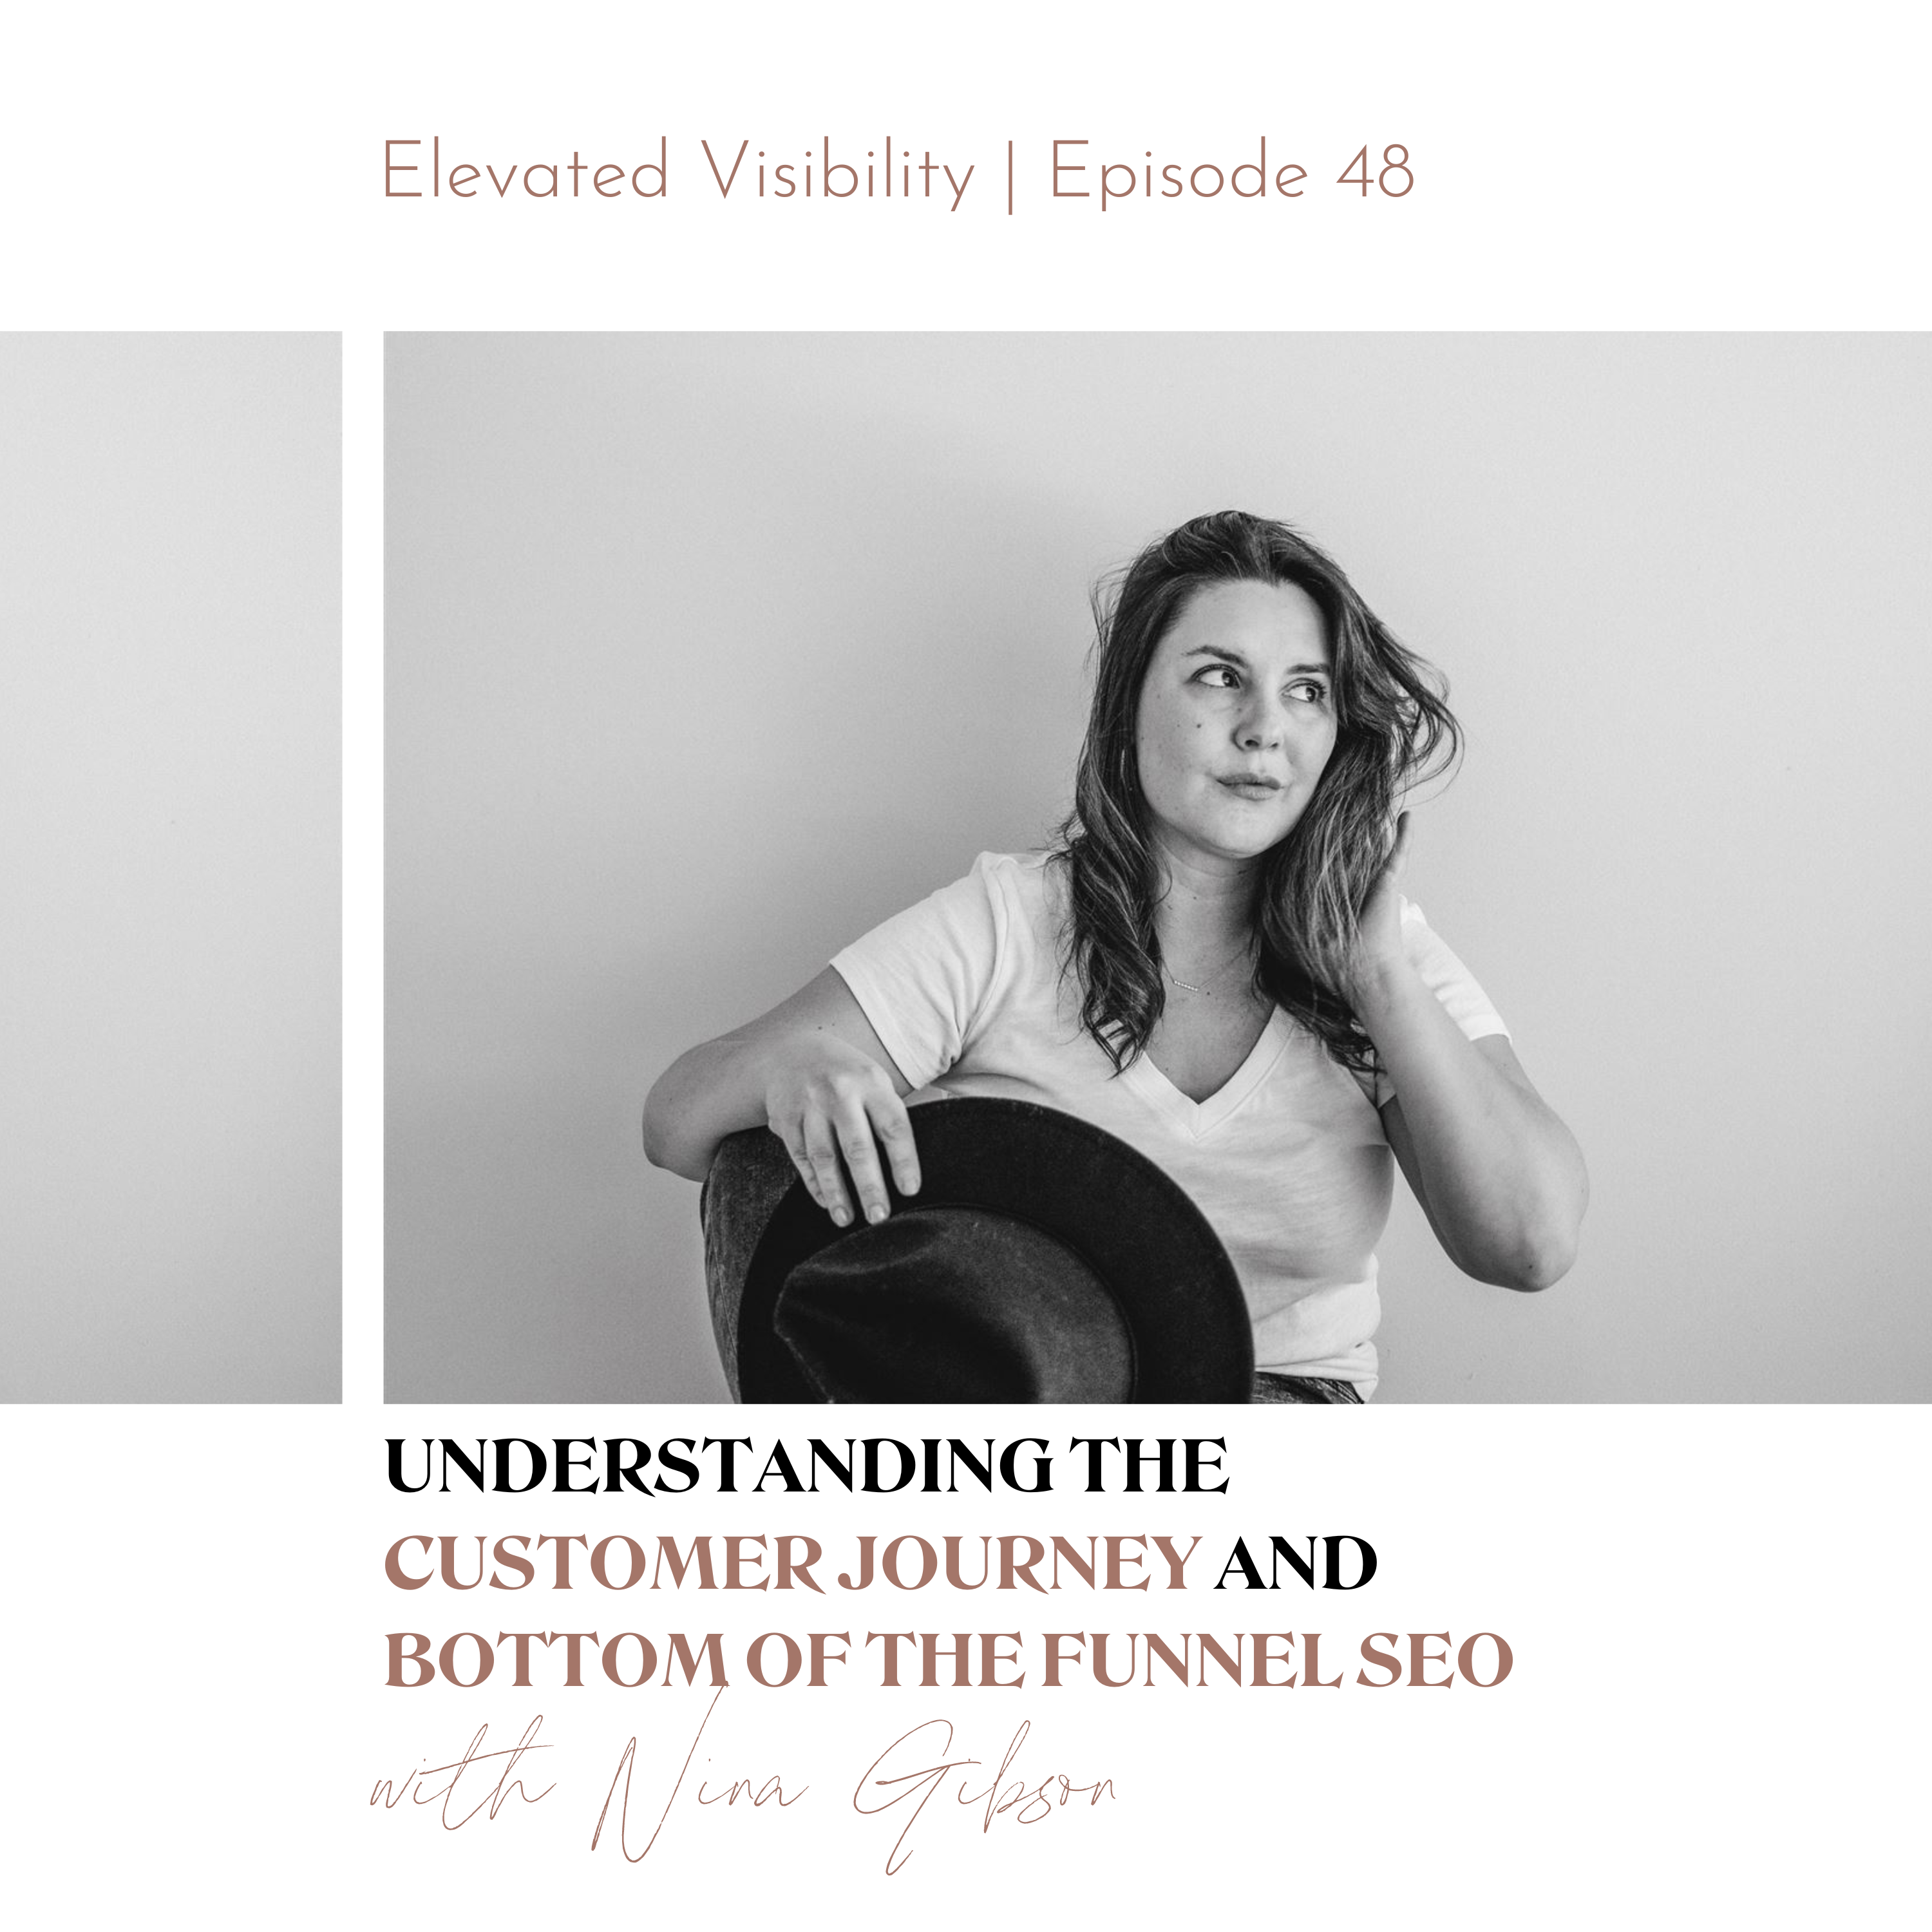 Understanding the Customer Journey and Bottom of the Funnel SEO Episode 48 of the Elevated Visibility Podcast